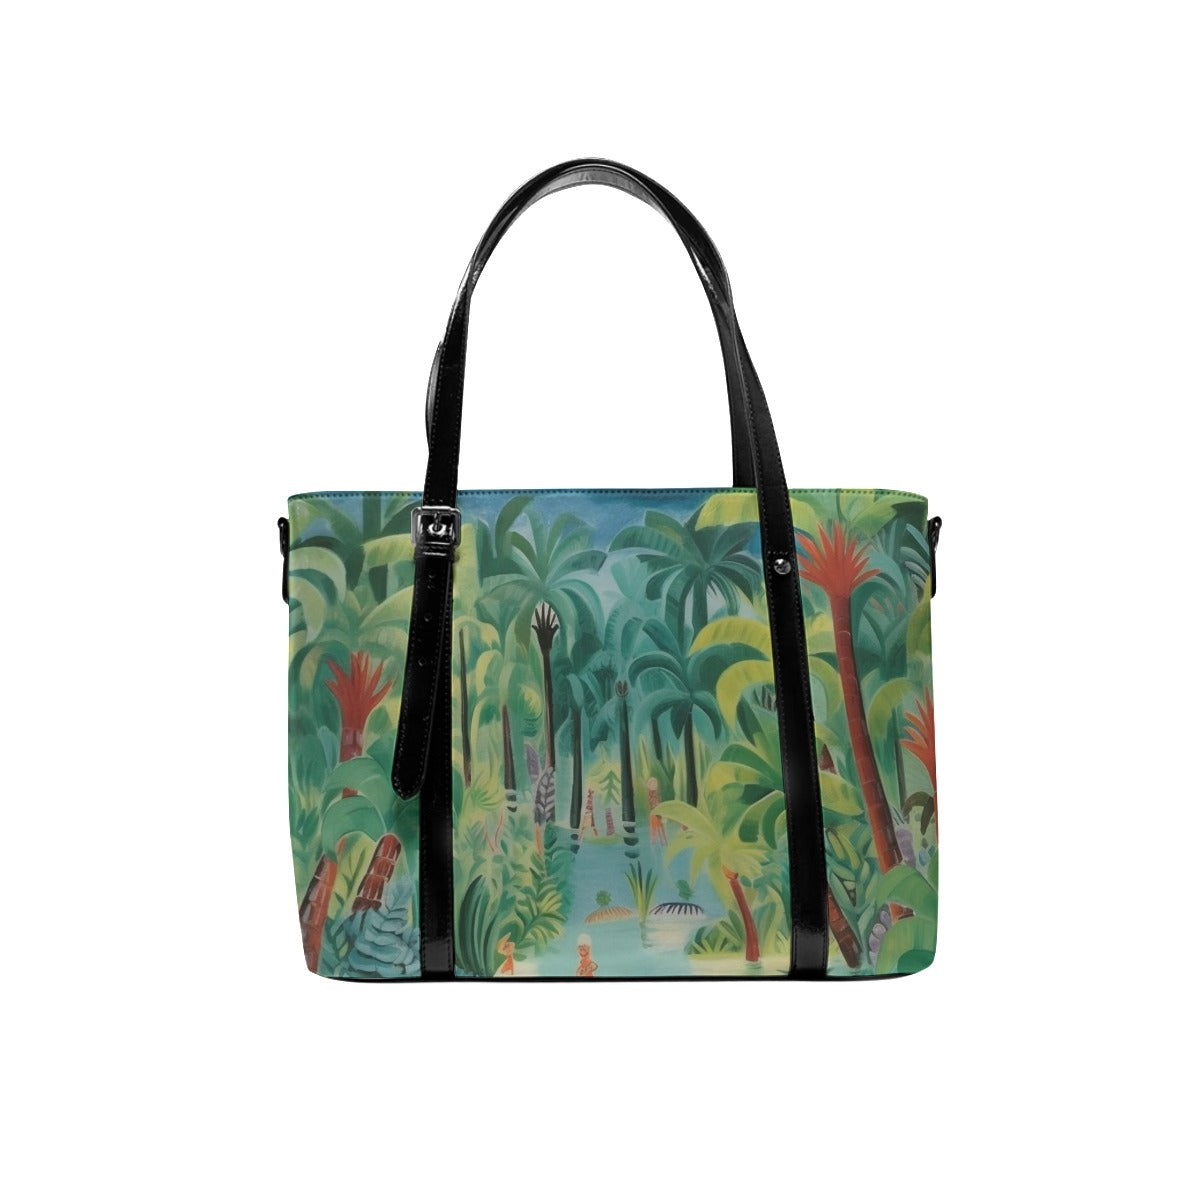 Women's Tote Bag With Adjustable Handle